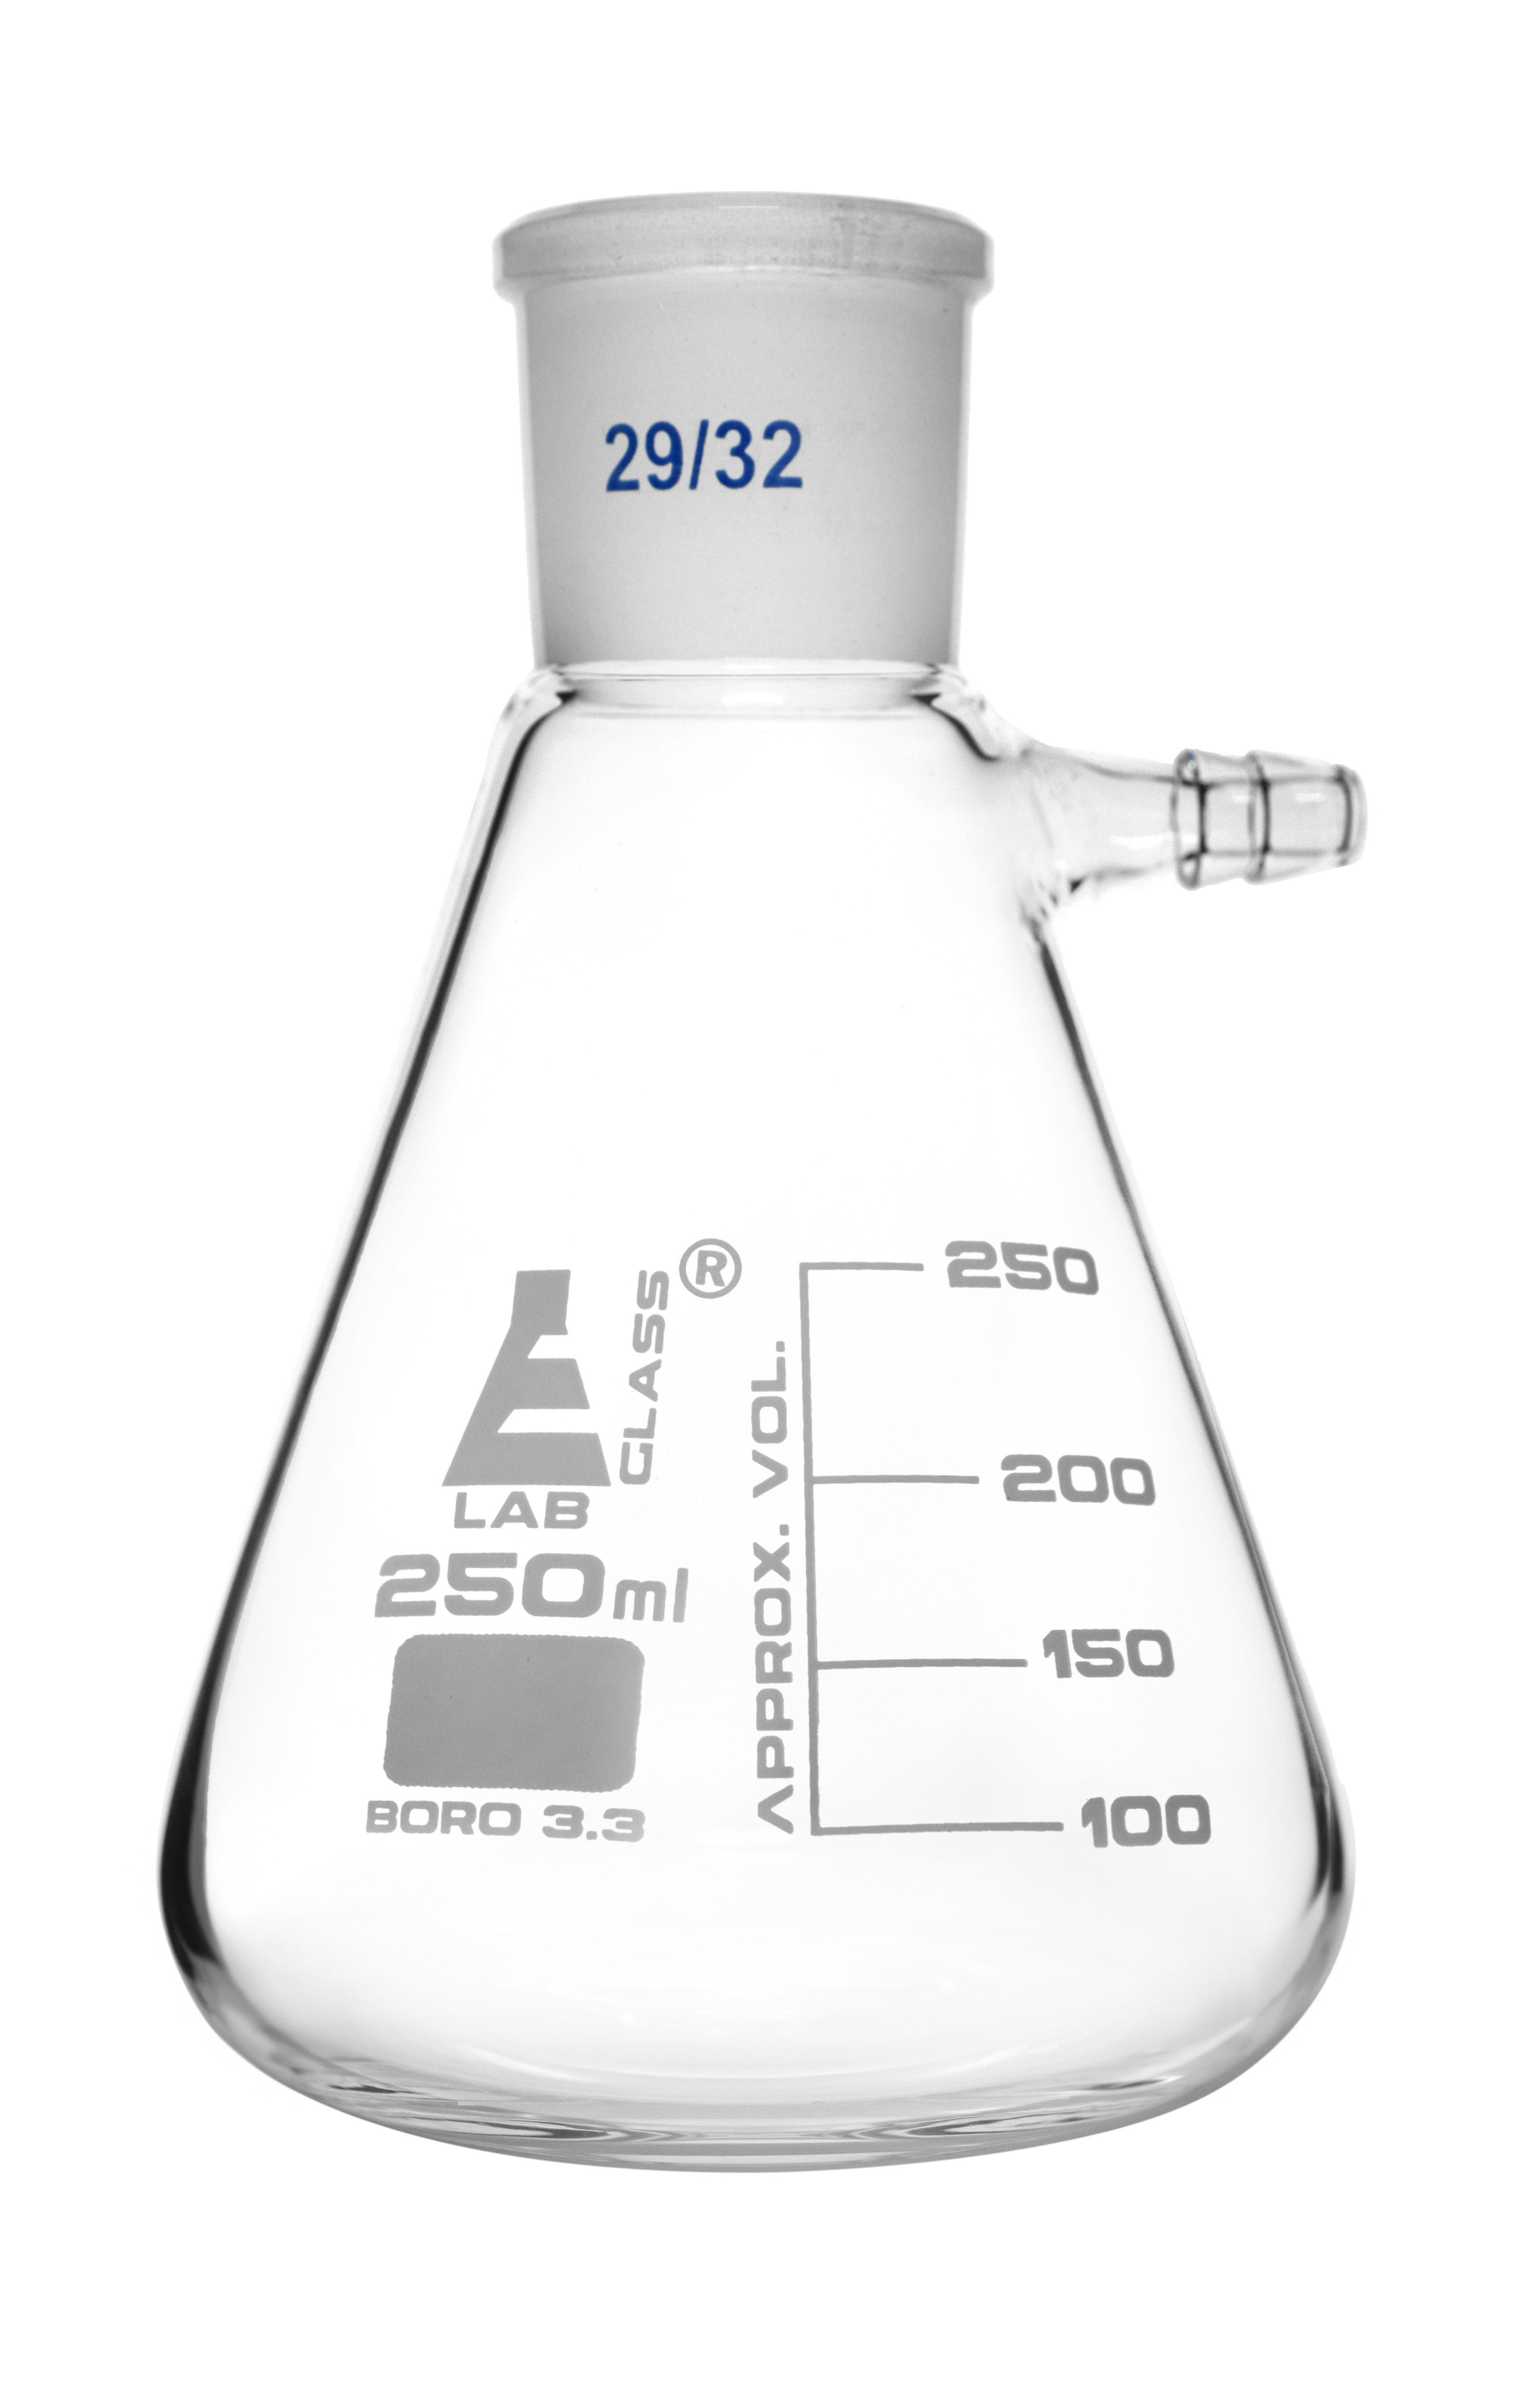 Borosilicate Glass Buchner Filtering Flask With Integral Side Arm, 250ml, Graduated, Autoclavable